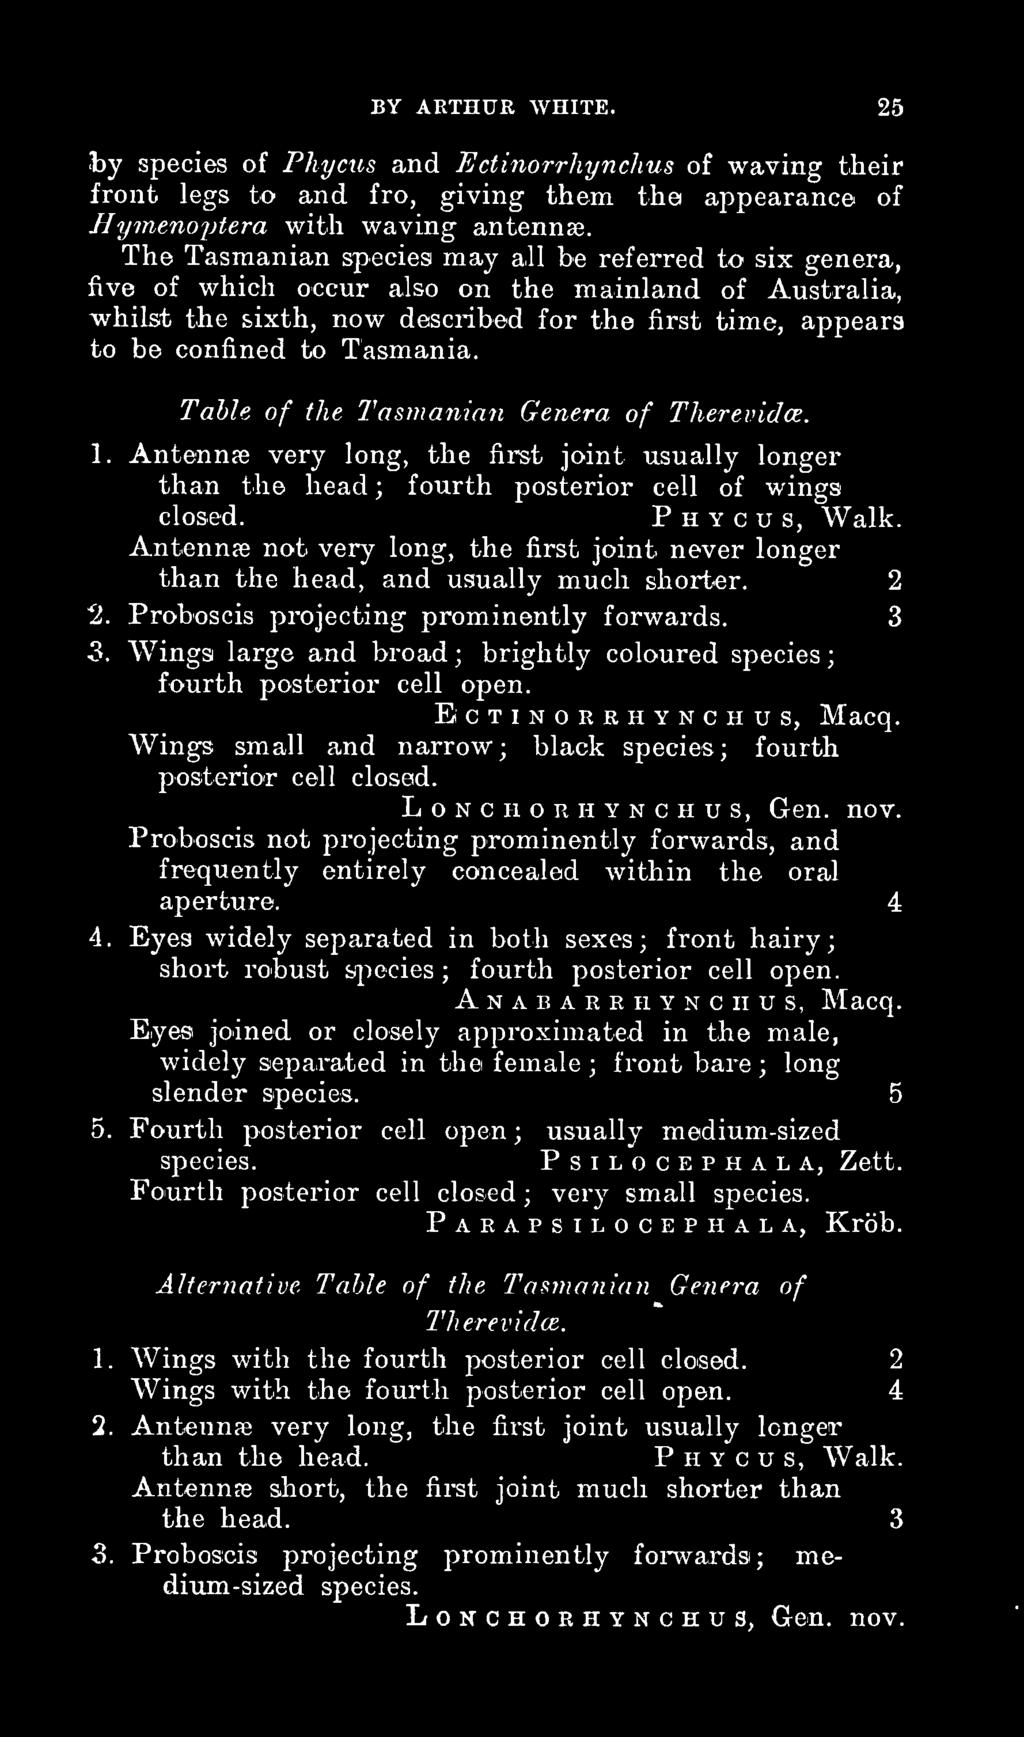 Table of the Tasmanian Genera of Therevidce. 1. Antennae very long, the first joint usually longer than the head ; fourth posterior cell of wings closed. Phycus, Walk.